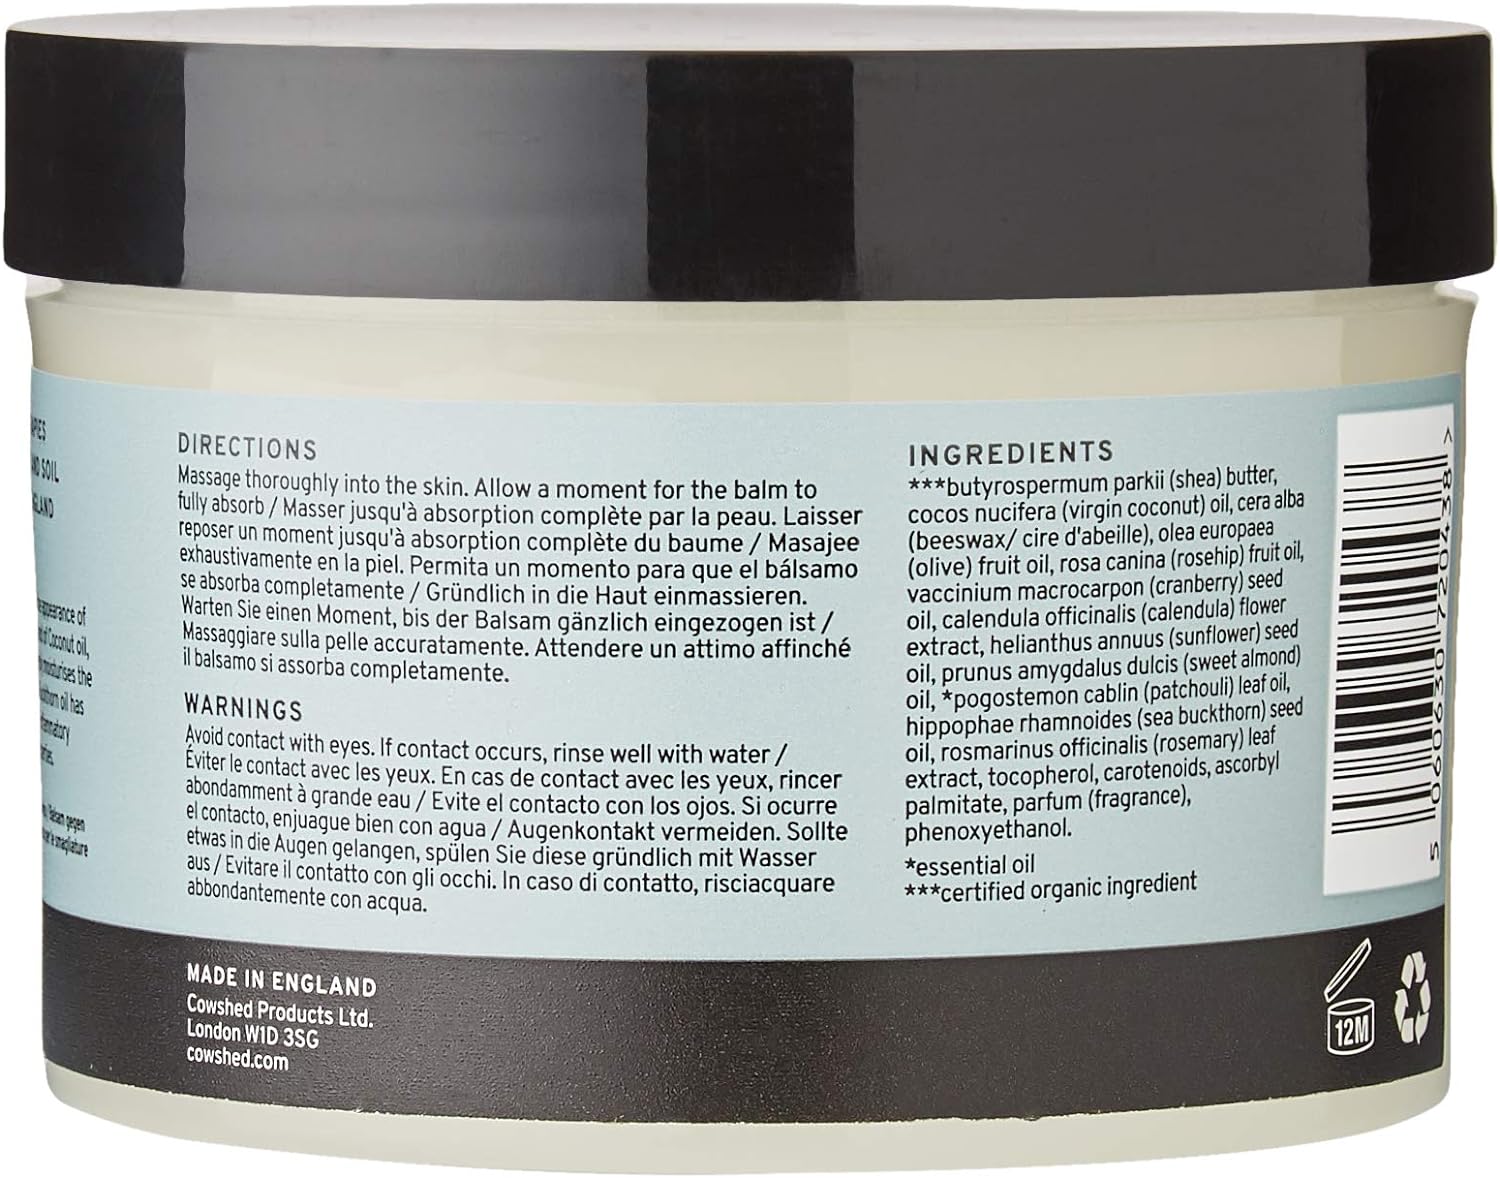 Cowshed Mother Stretch Mark Balm, 220 g

